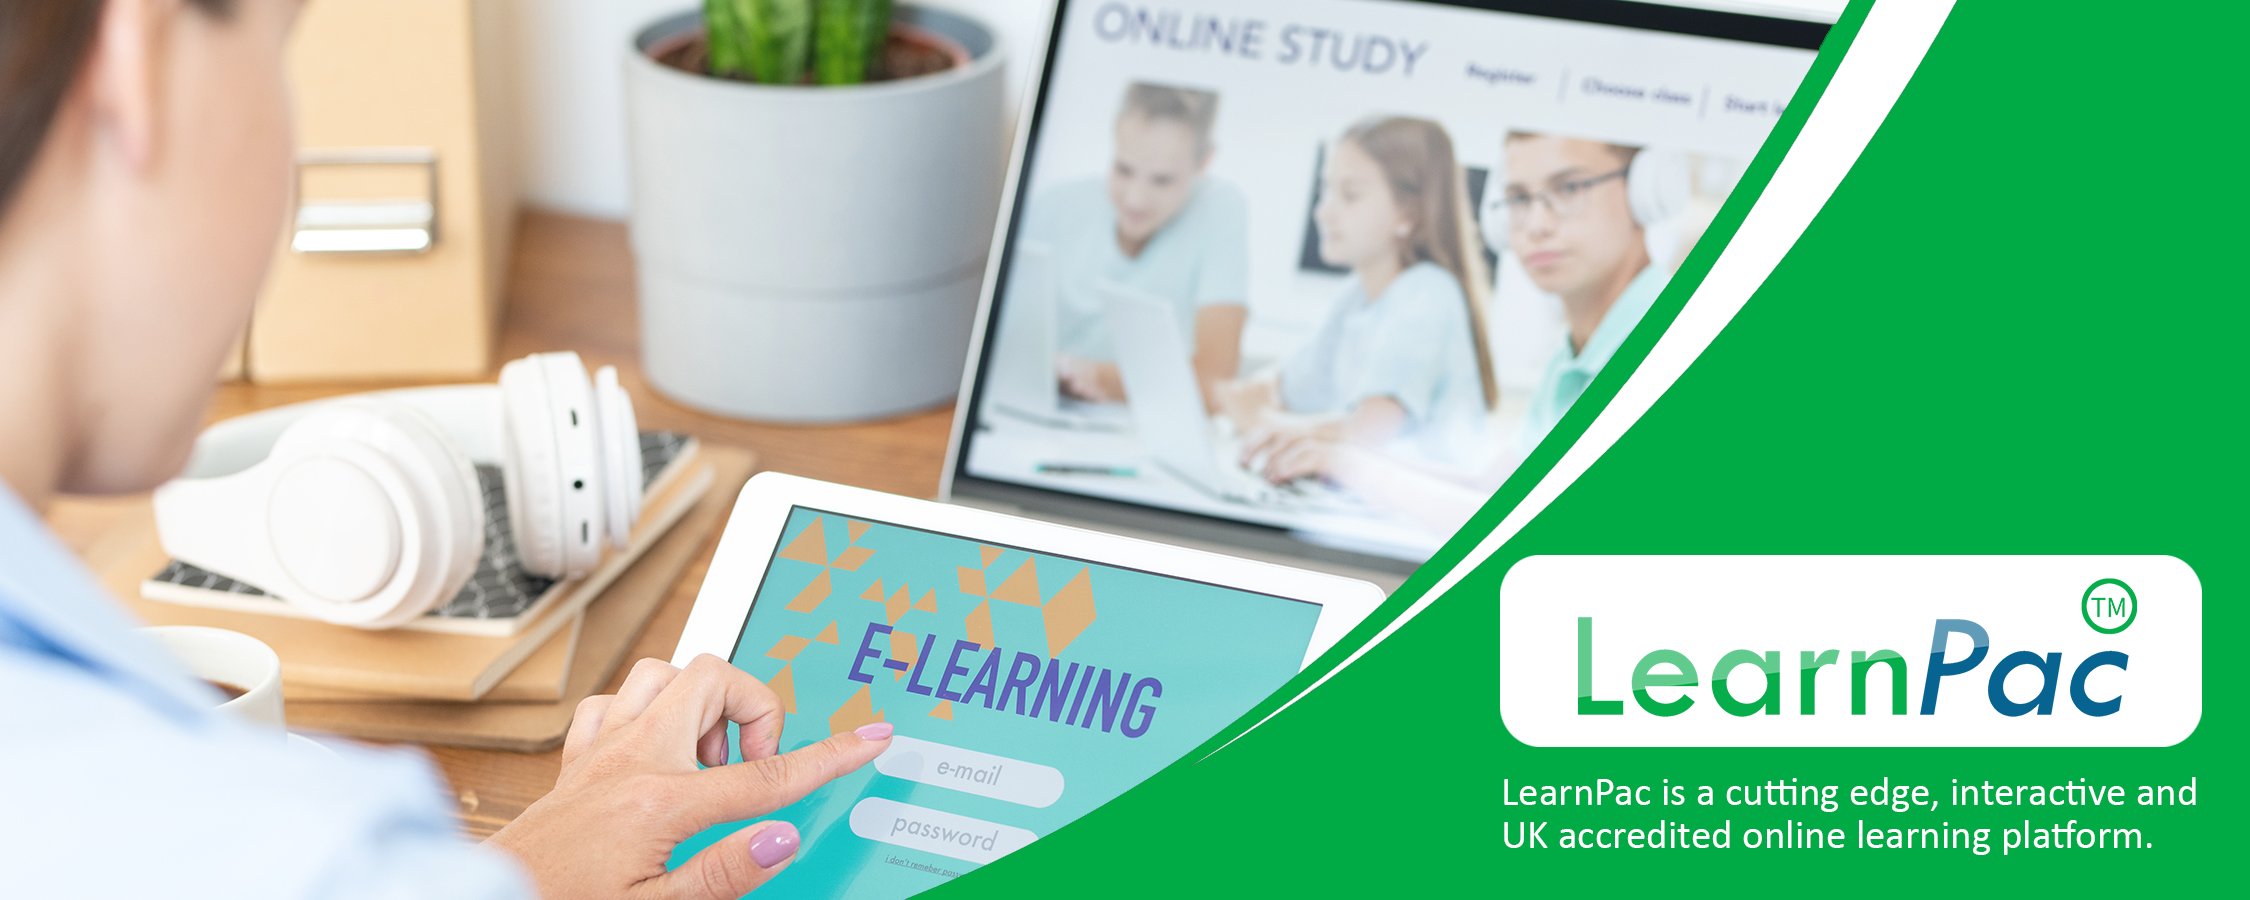 Measuring Results From Training - Online Learning Courses - E-Learning Courses - LearnPac Systems UK -